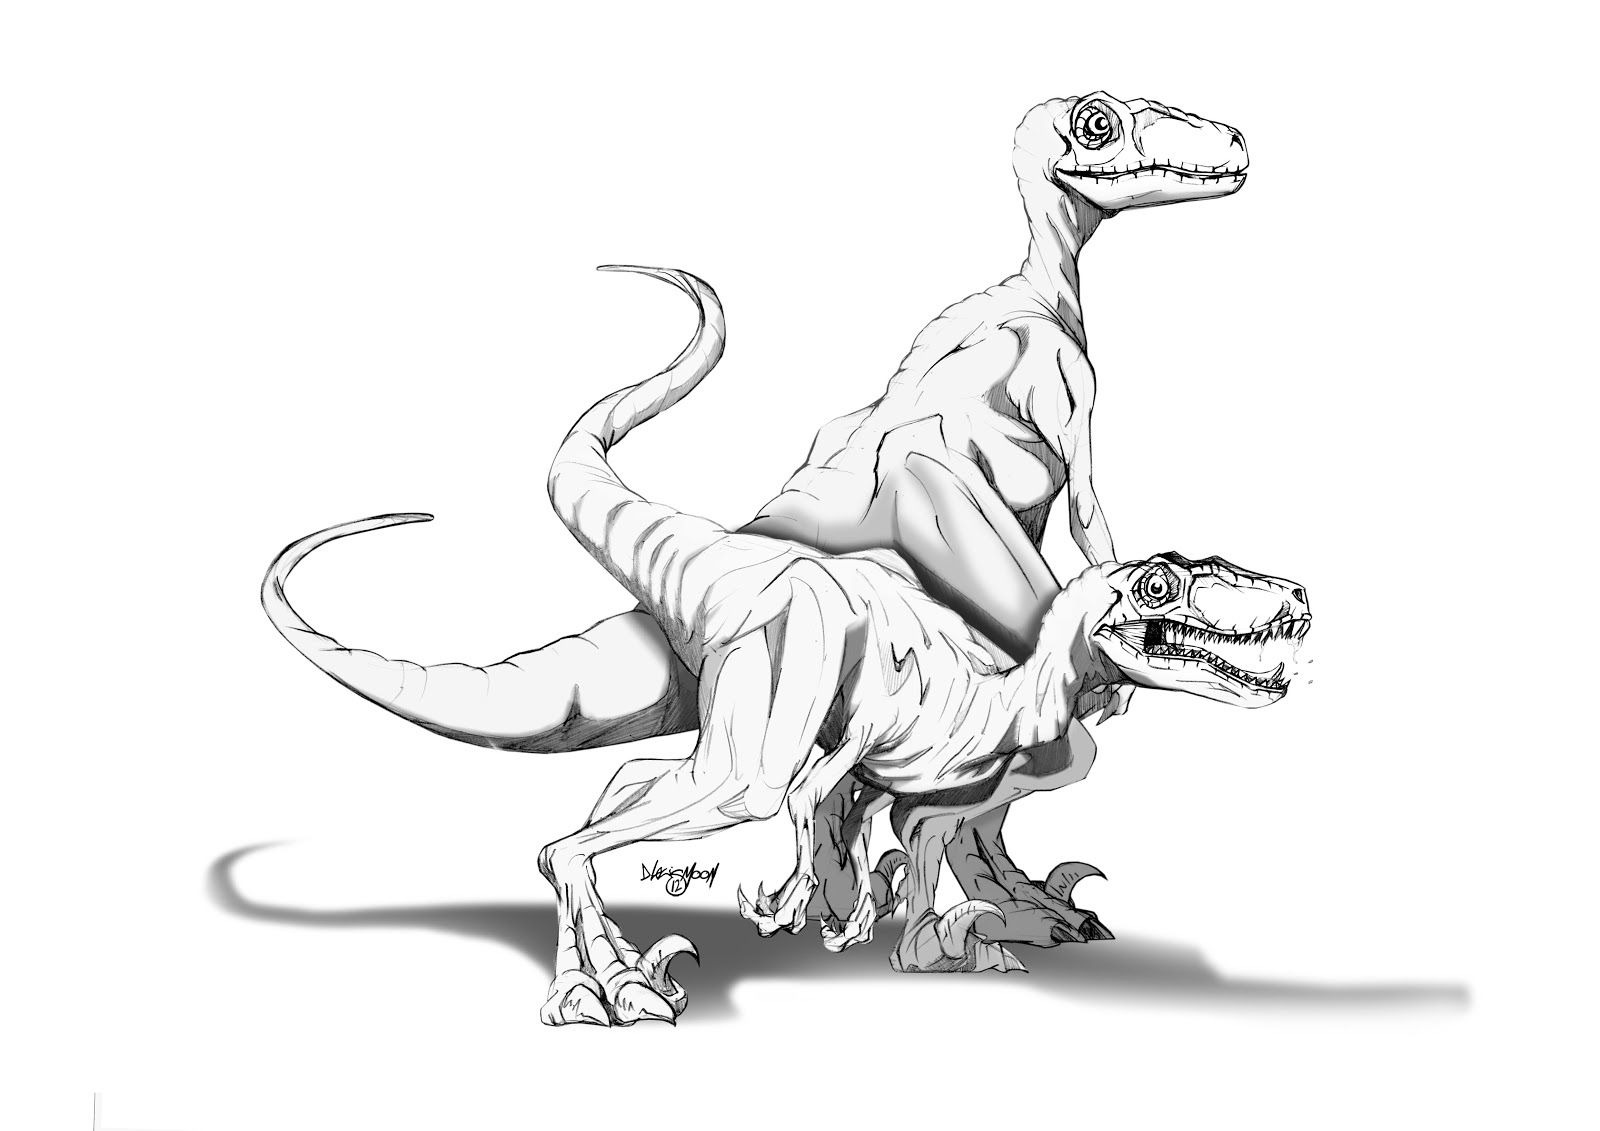 Free Velociraptor Coloring Page, Download Free Velociraptor Coloring